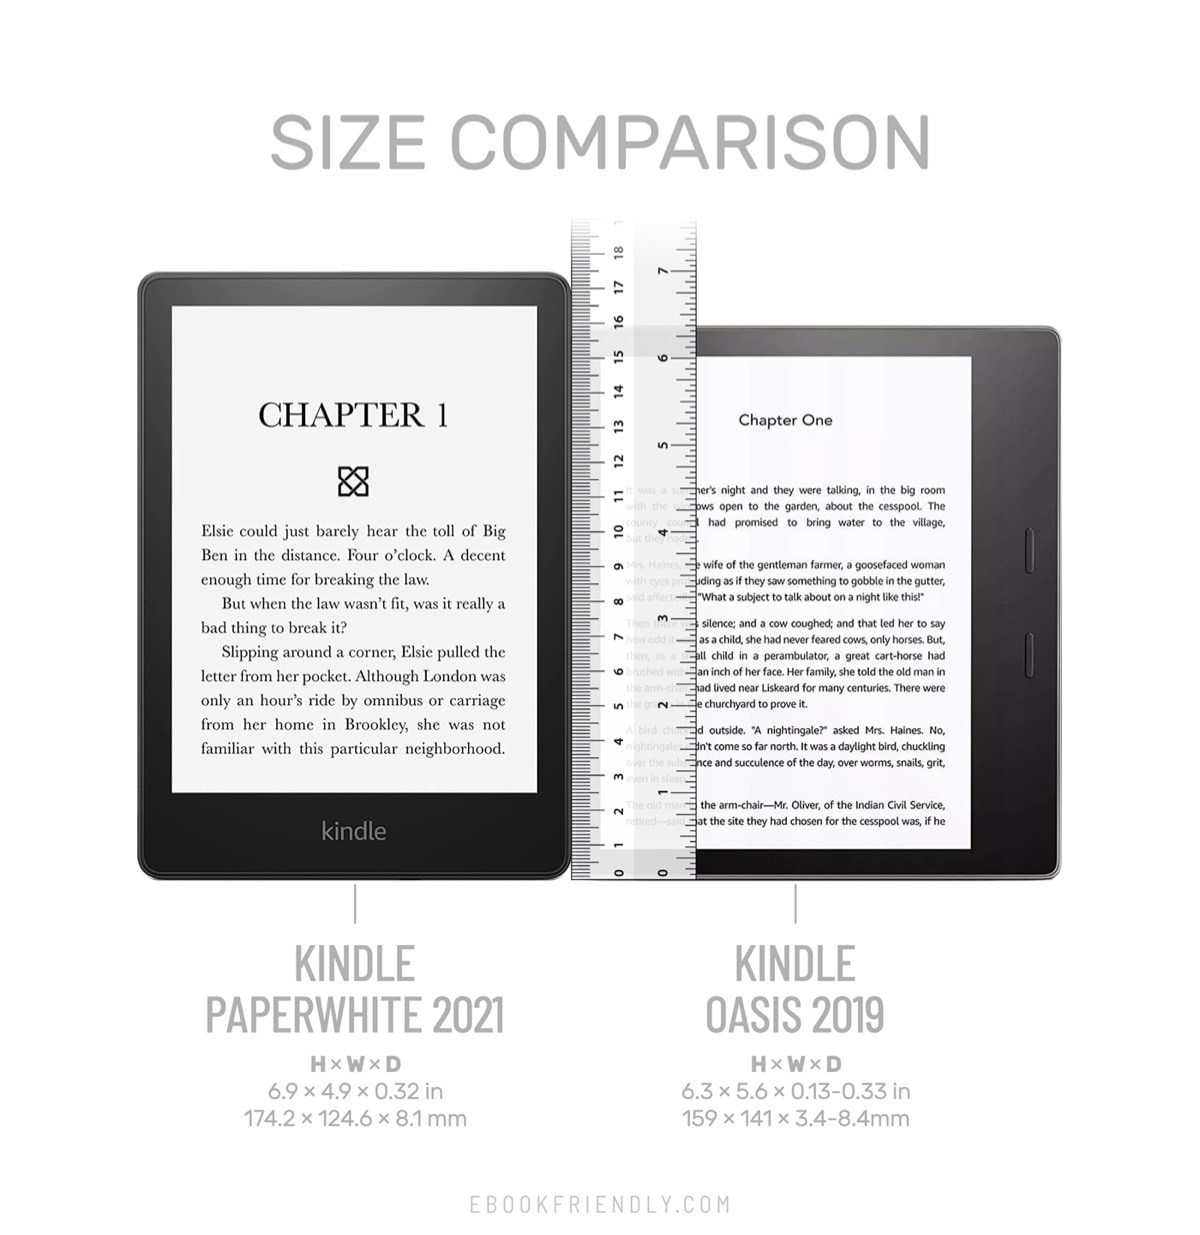 Kindle Paperwhite 6.8 is higher than Kindle Oasis 3